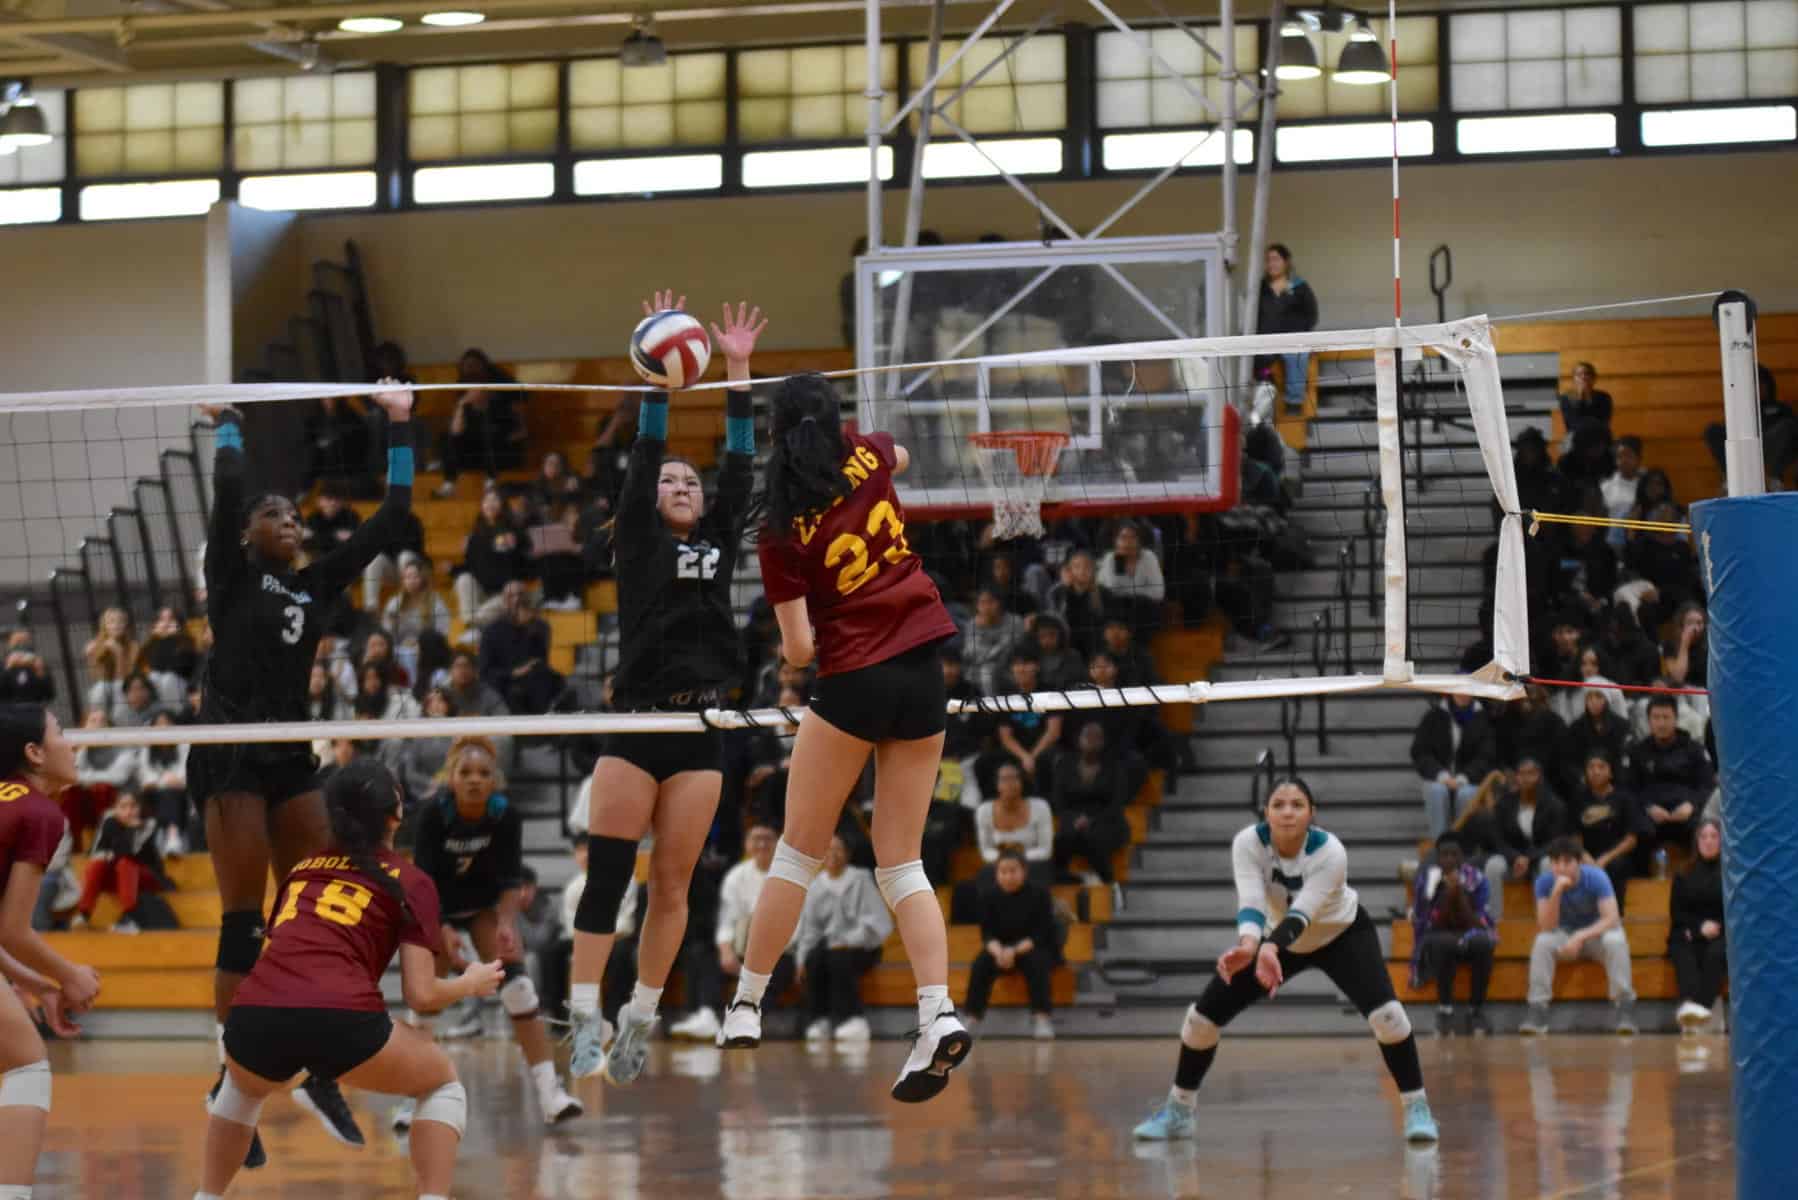 Palumbo Volleyball’s journey falls just short of ultimate prize